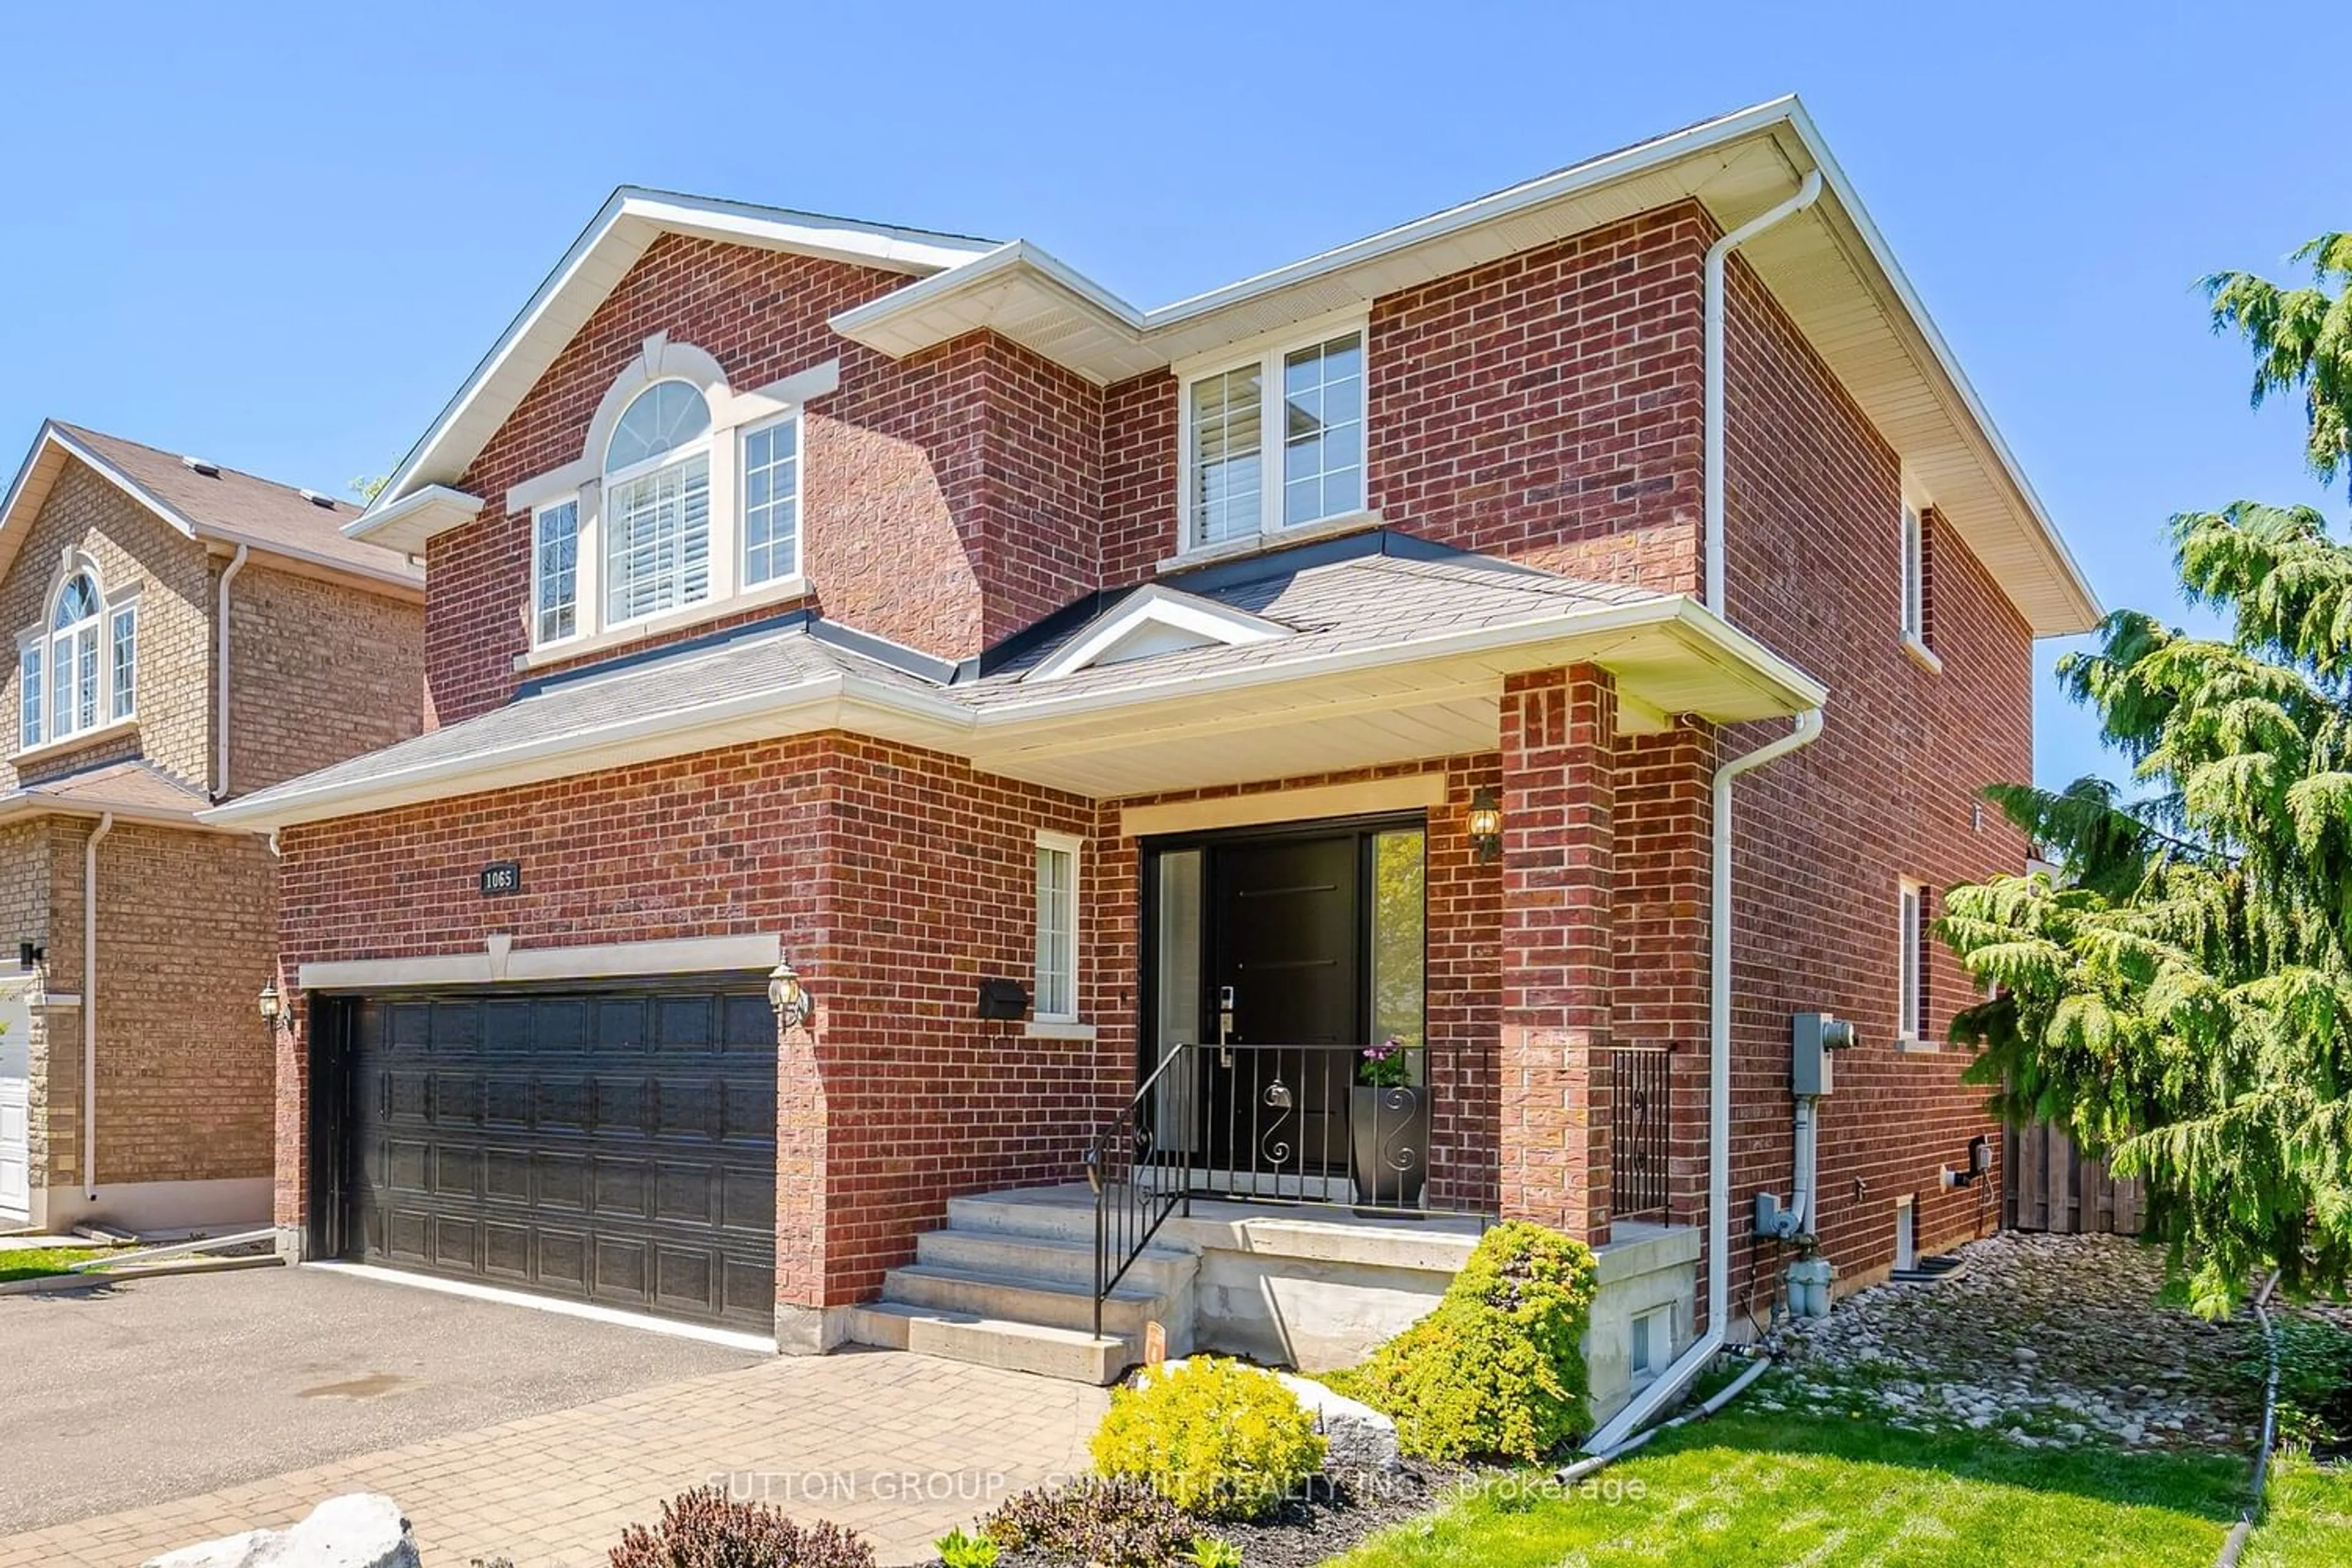 Home with brick exterior material for 1065 Halliday Ave, Mississauga Ontario L5E 1P8